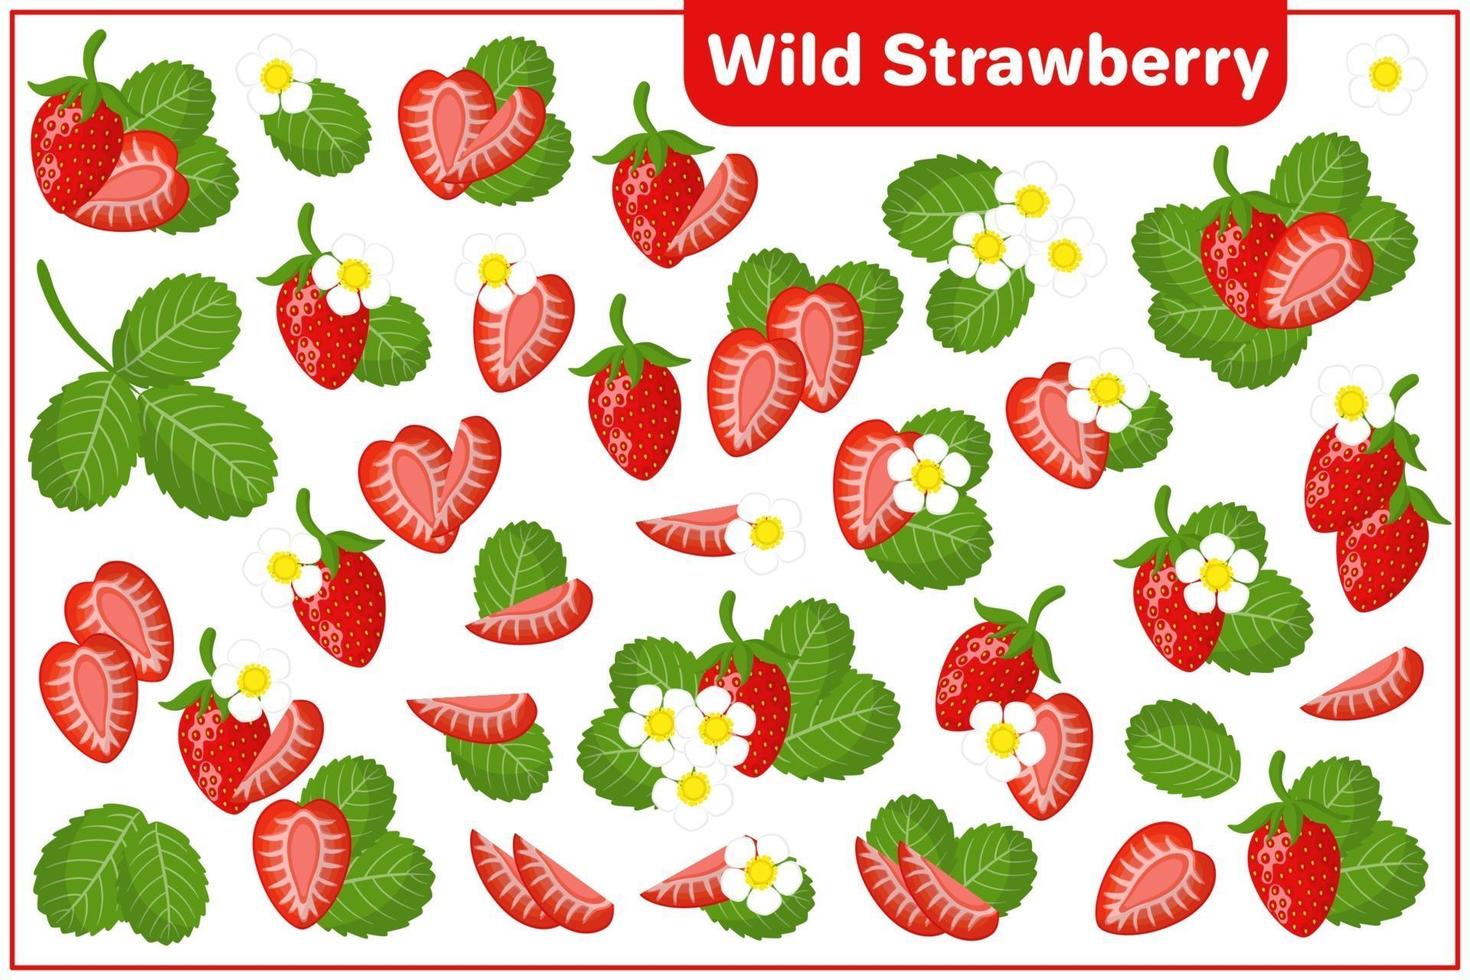 Set of vector cartoon illustrations with Wild Strawberry exotic fruits, flowers and leaves isolated on white background